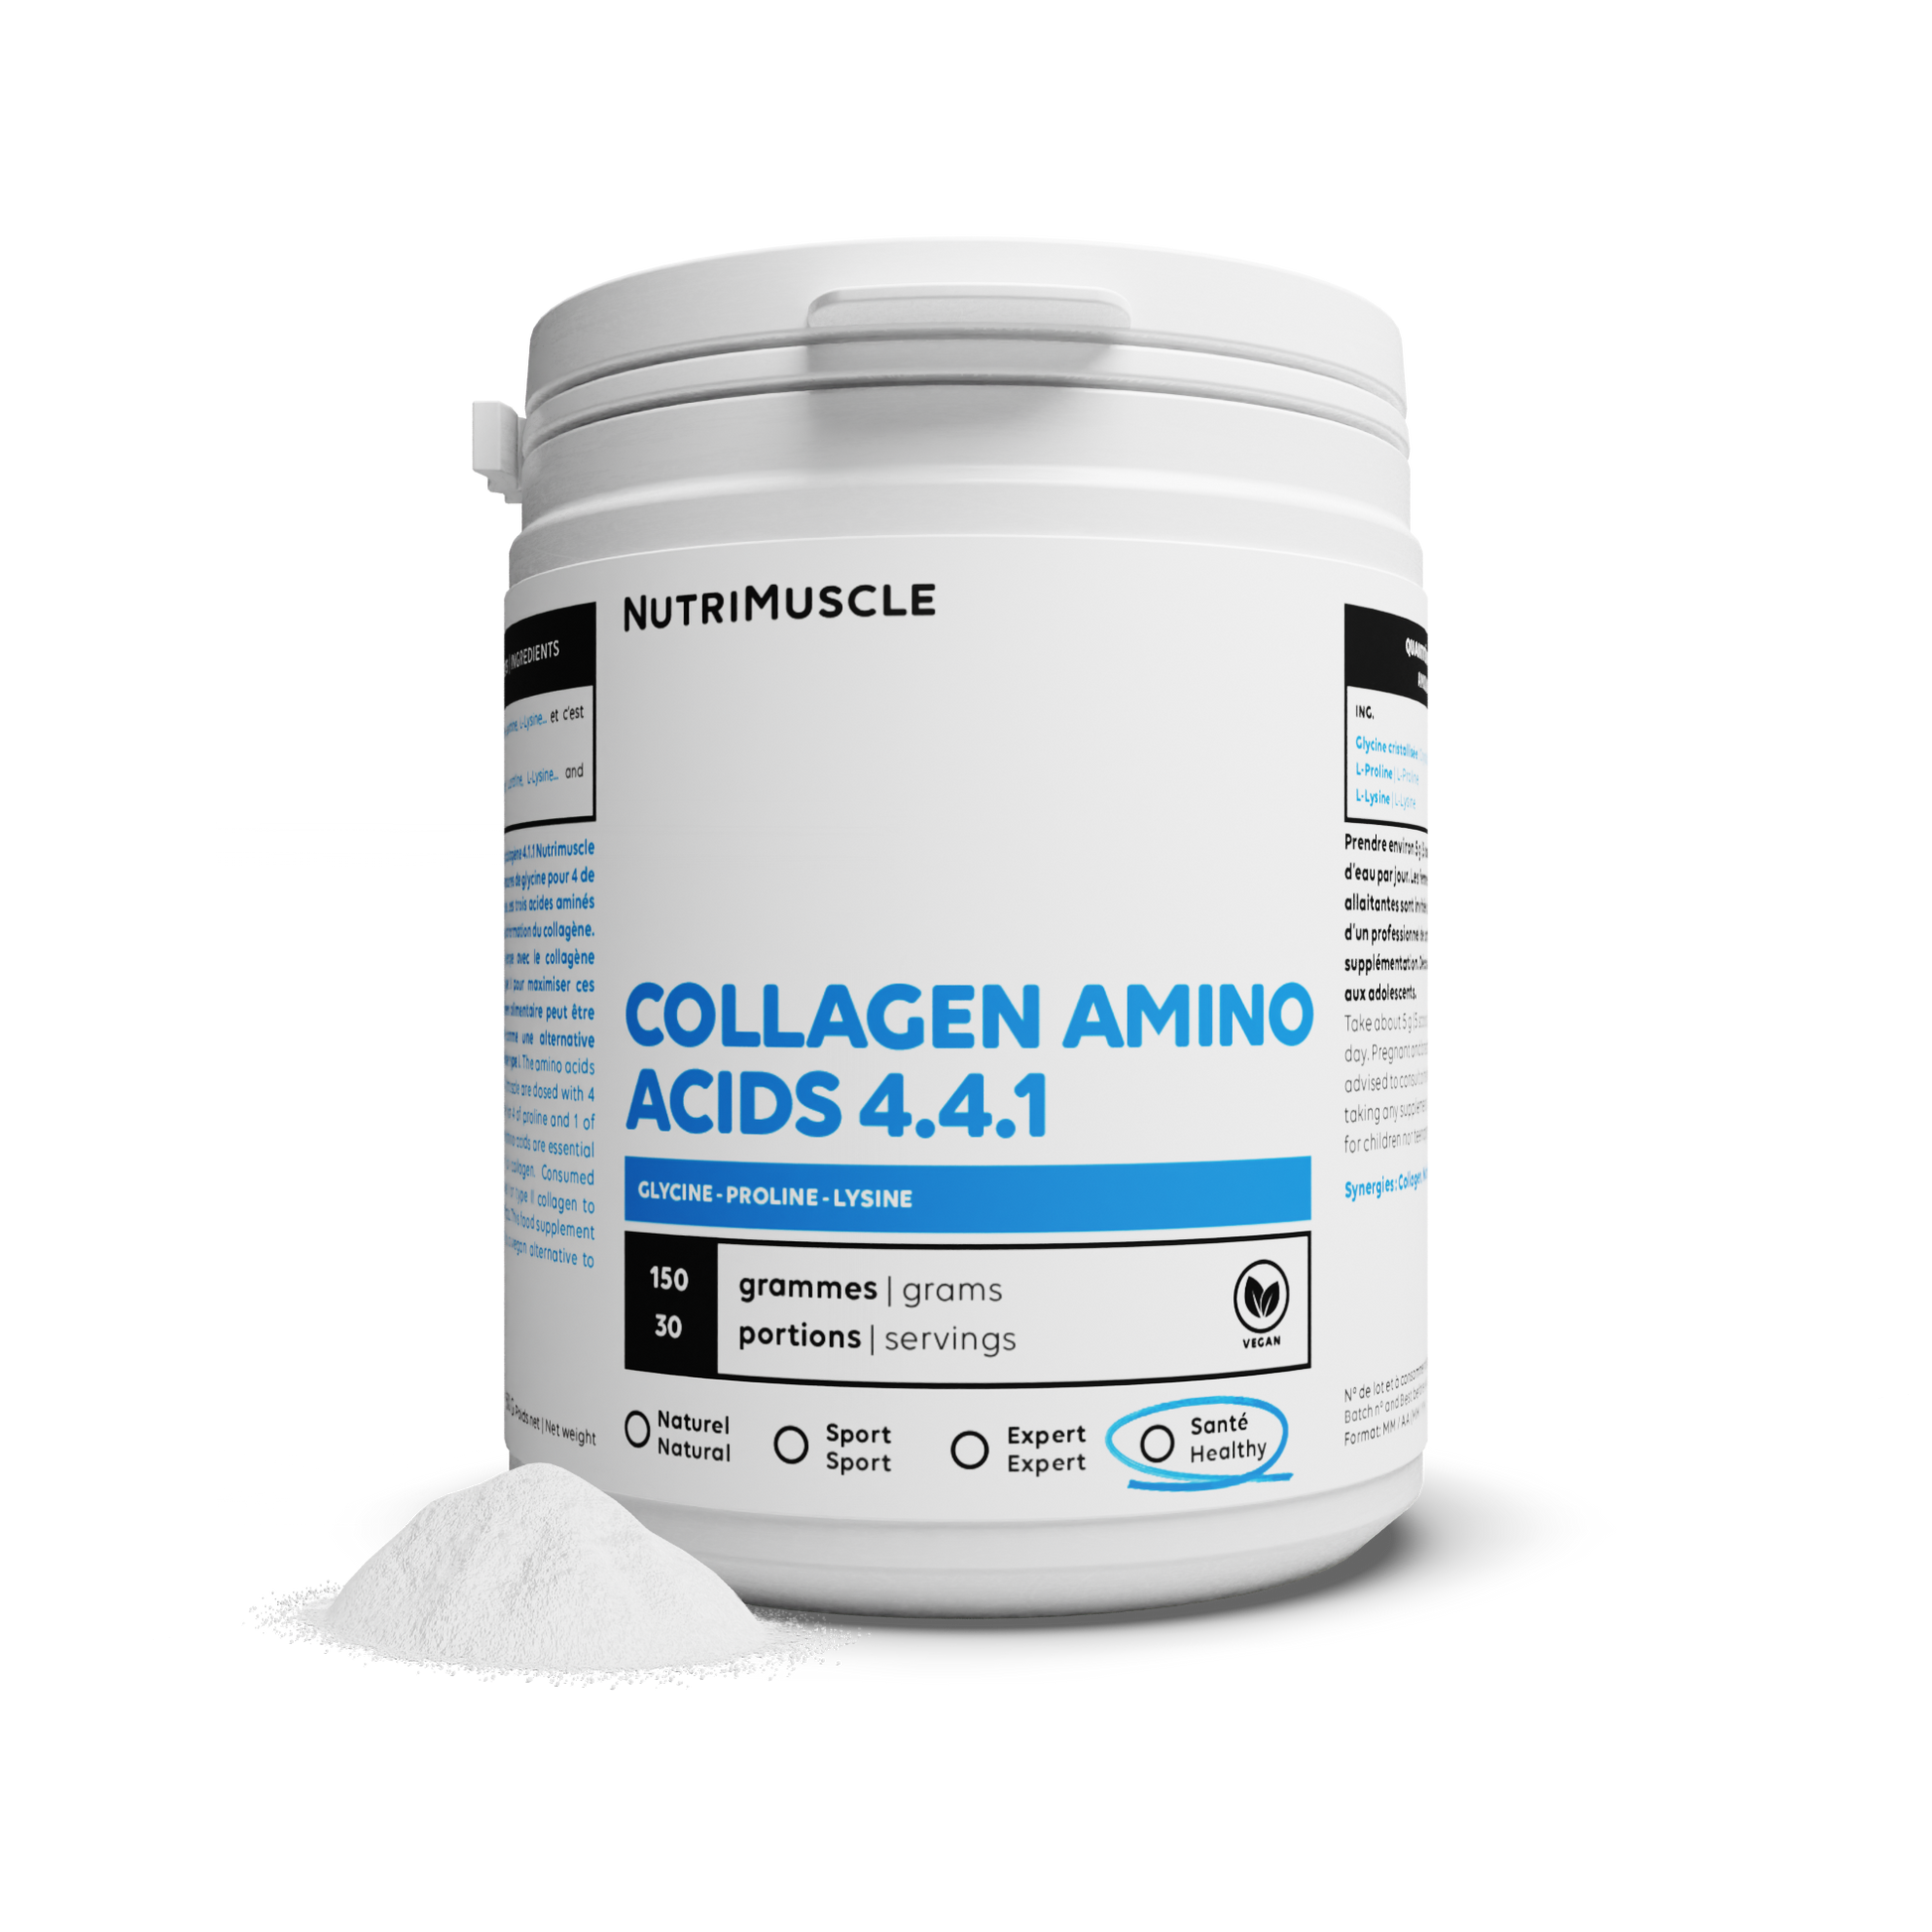 BCAA 4.1.1 Manufacturers in capsules